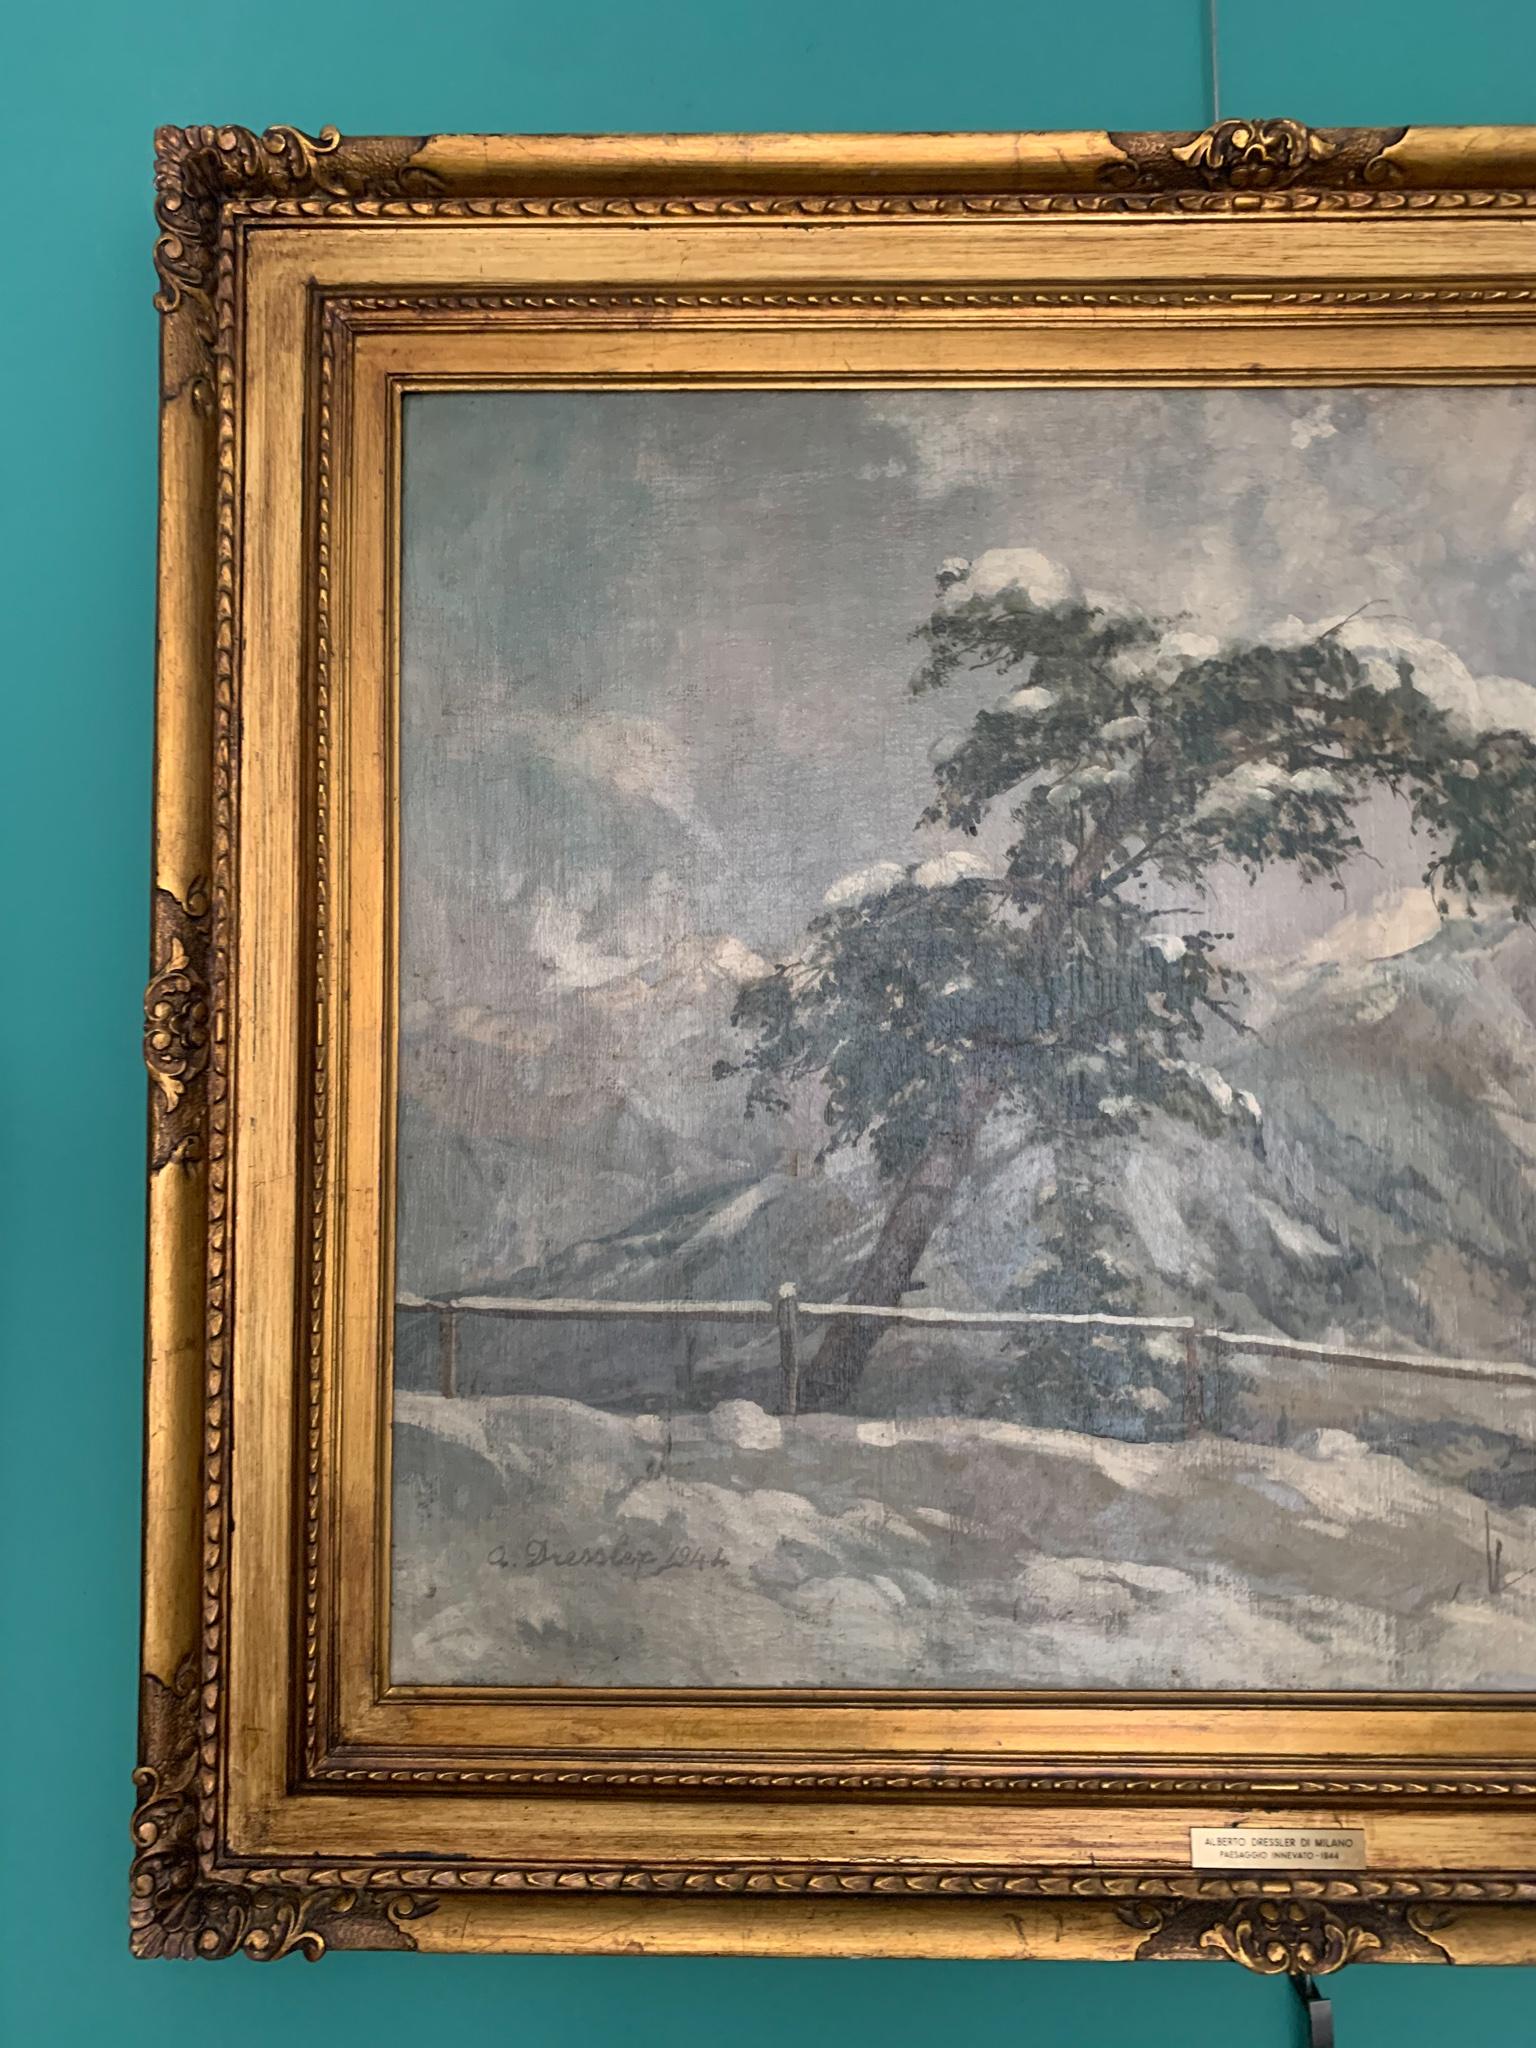 Italian Oil Painting on Canvas by Alberto Dressler 'Snowy Landscape' from 1944 For Sale 2